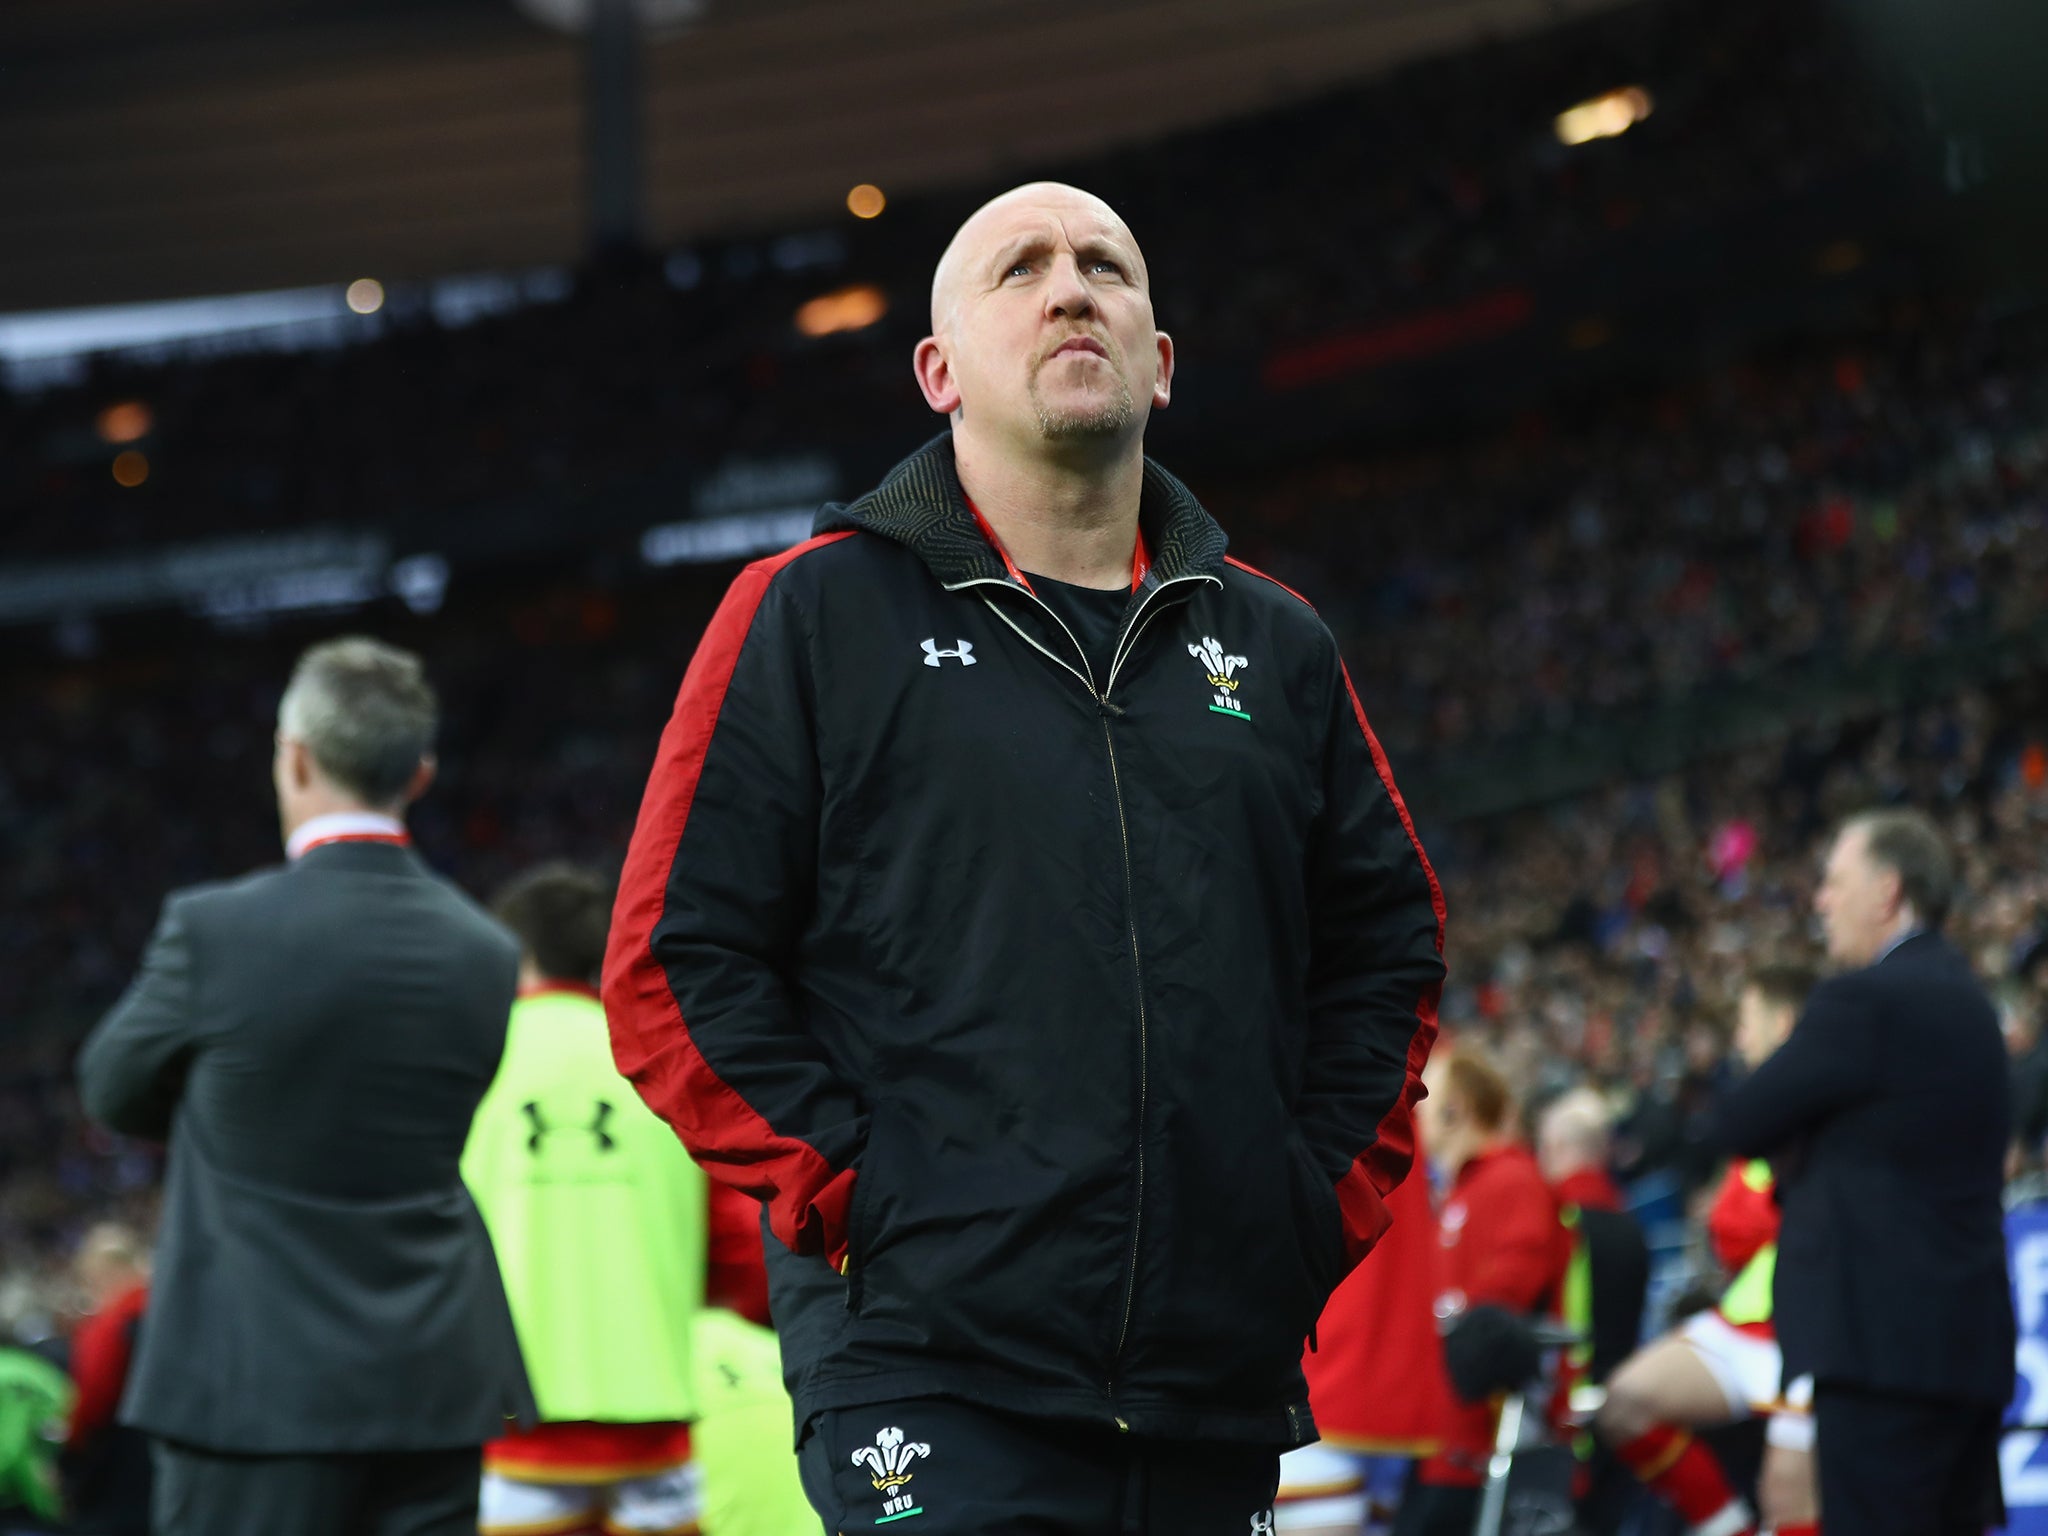 Shaun Edwards was interviewed for the Quins role and could yet be targeted by England